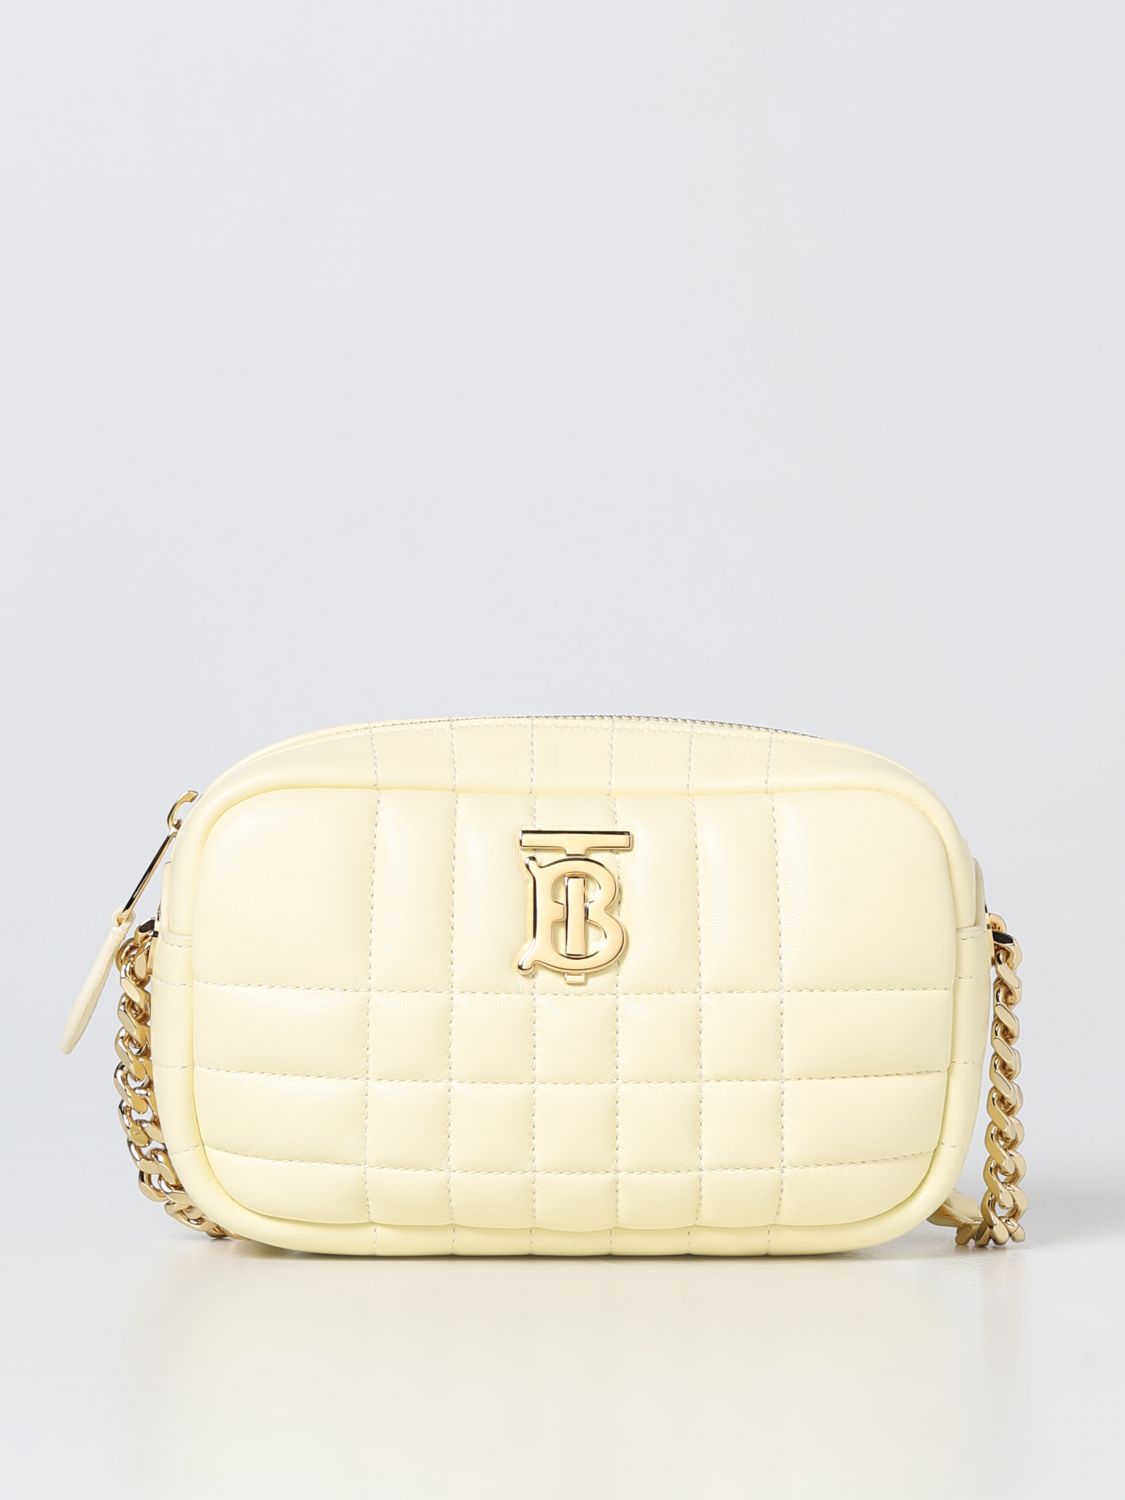 BURBERRY: Lola bag in quilted leather - Yellow  Burberry mini bag 8066149  online at